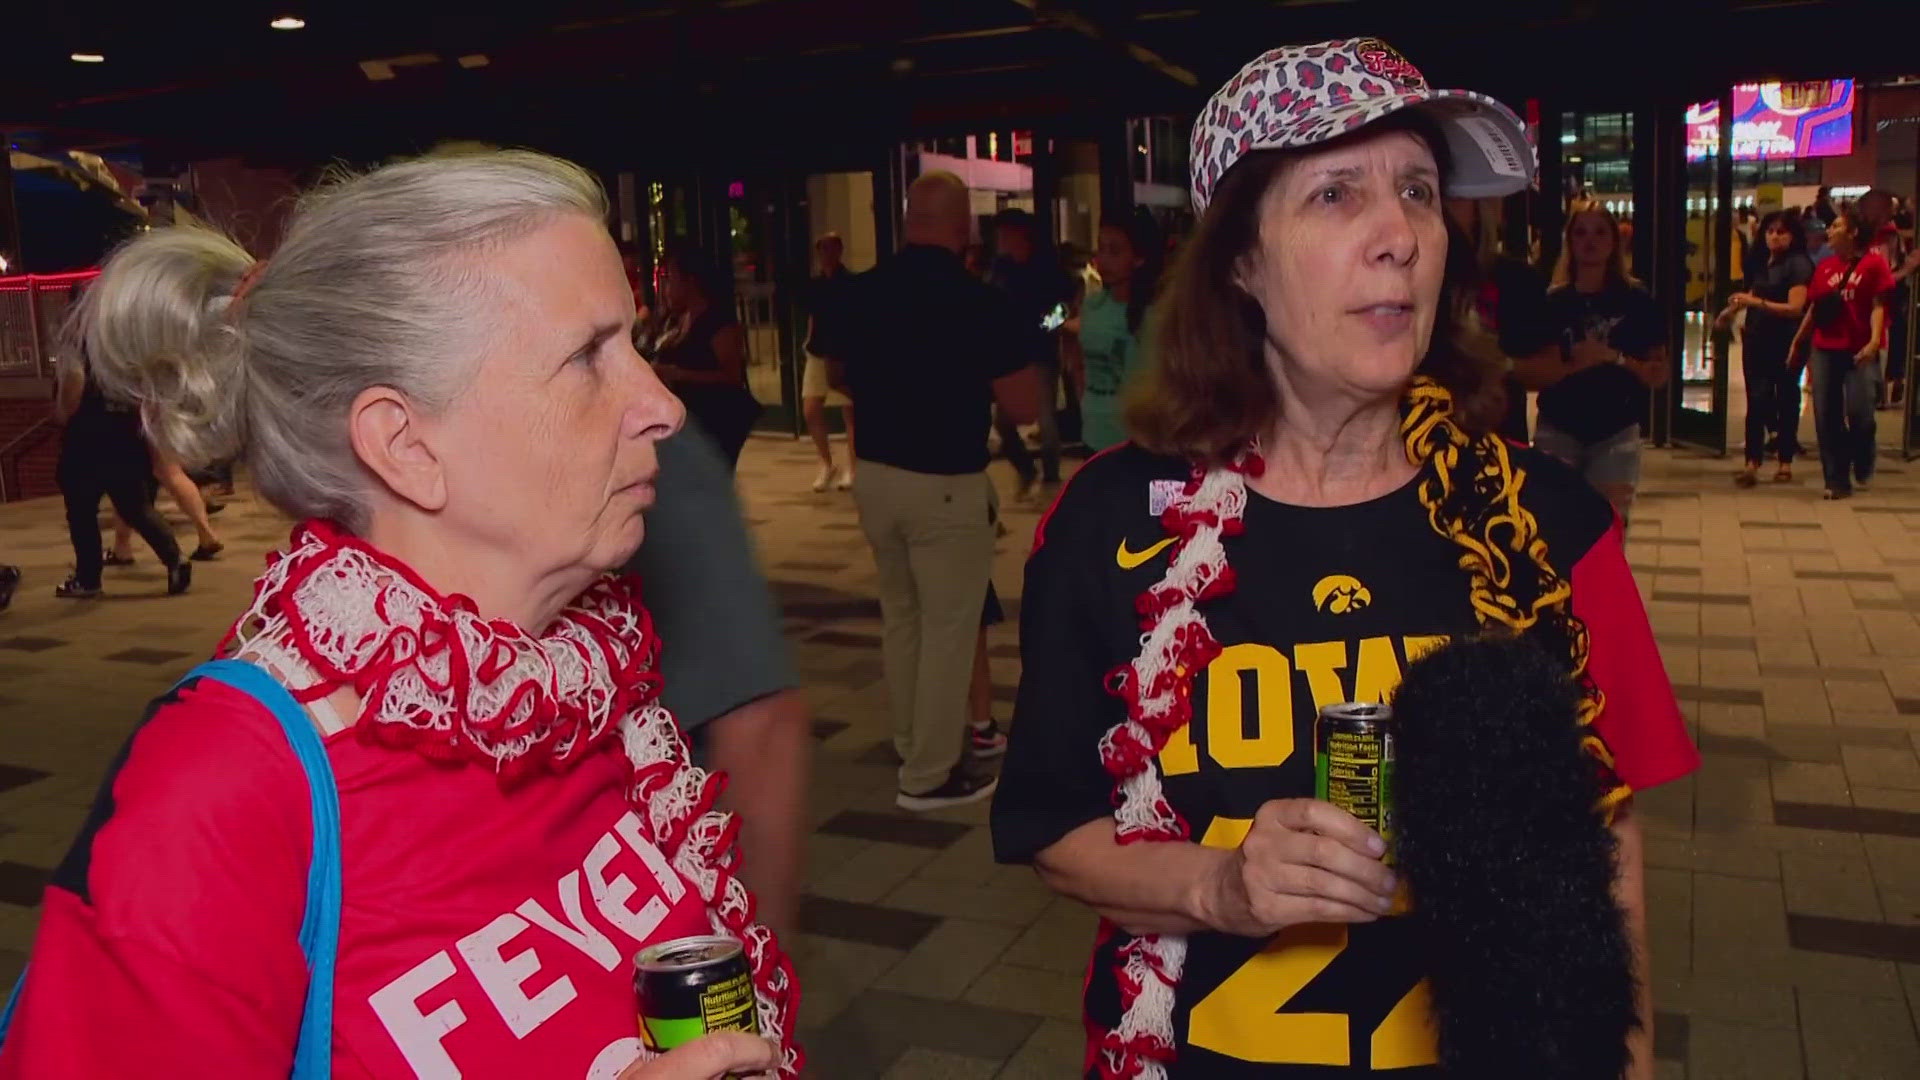 13News reporter Anna Chalker talks with Indiana Fever fans who say they're still hopeful despite the team's 0-4 start to the season.